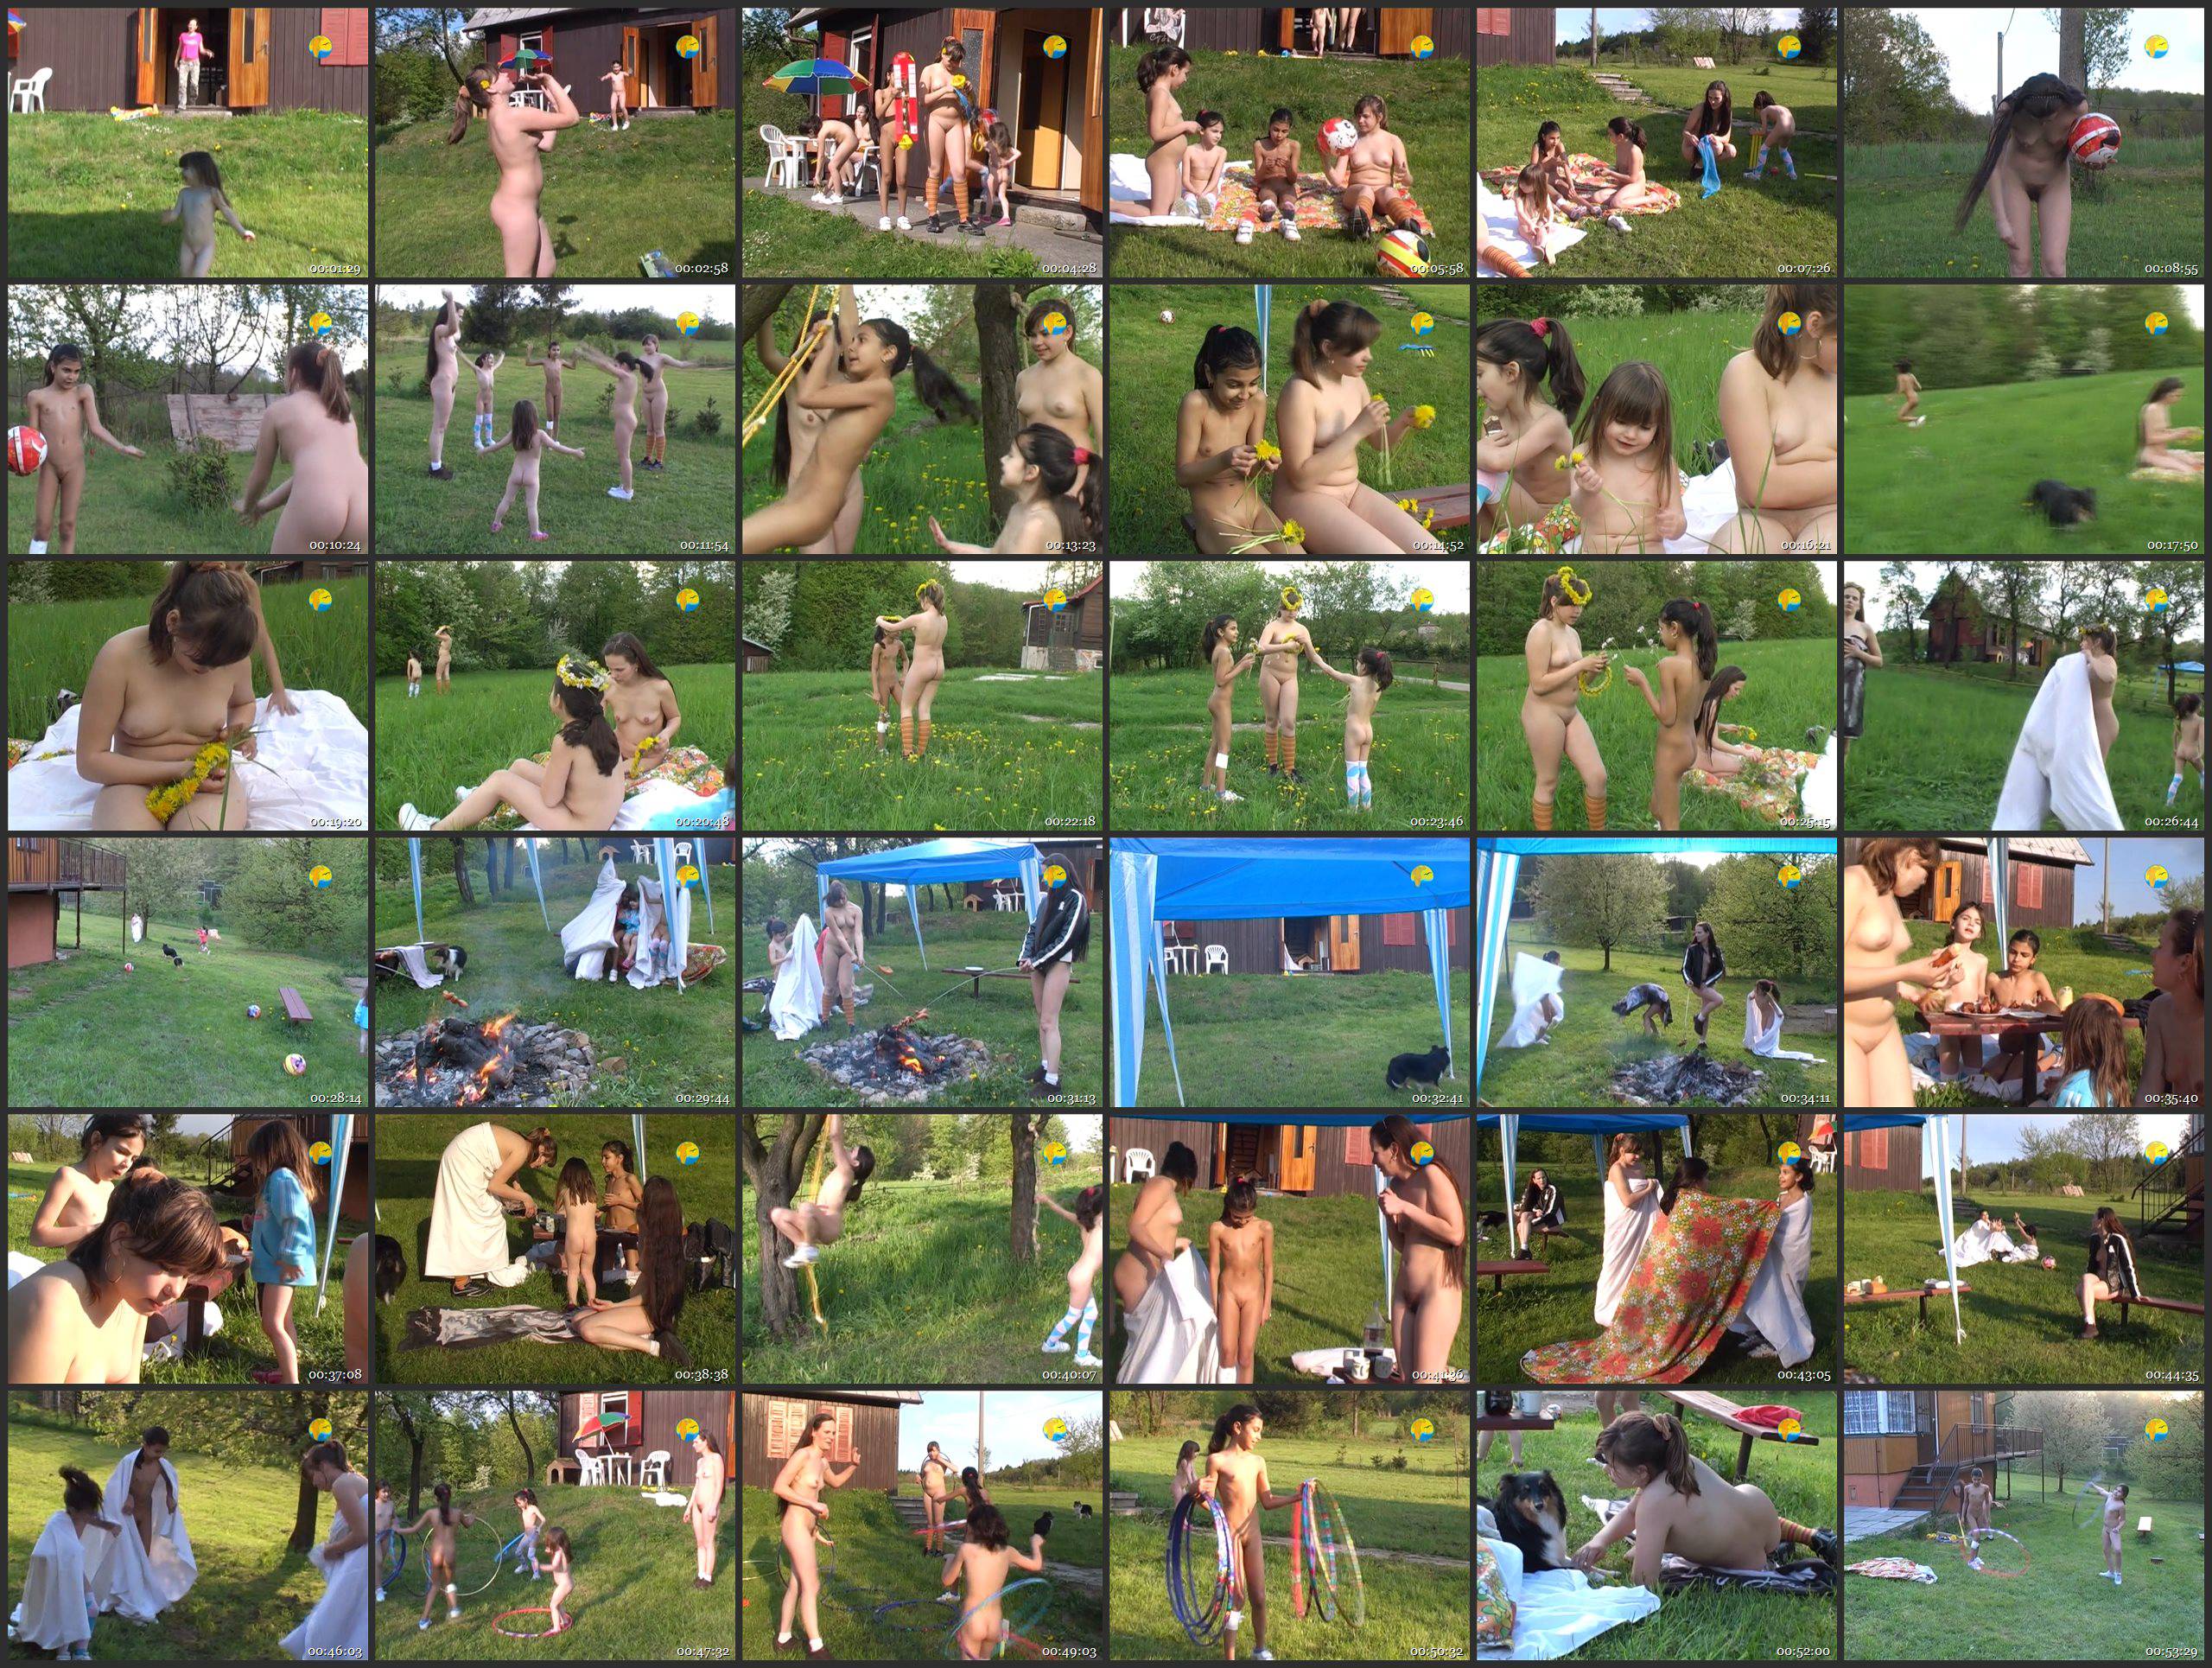 Naturist Freedom-With Mum at the Cottage - Thumbnails